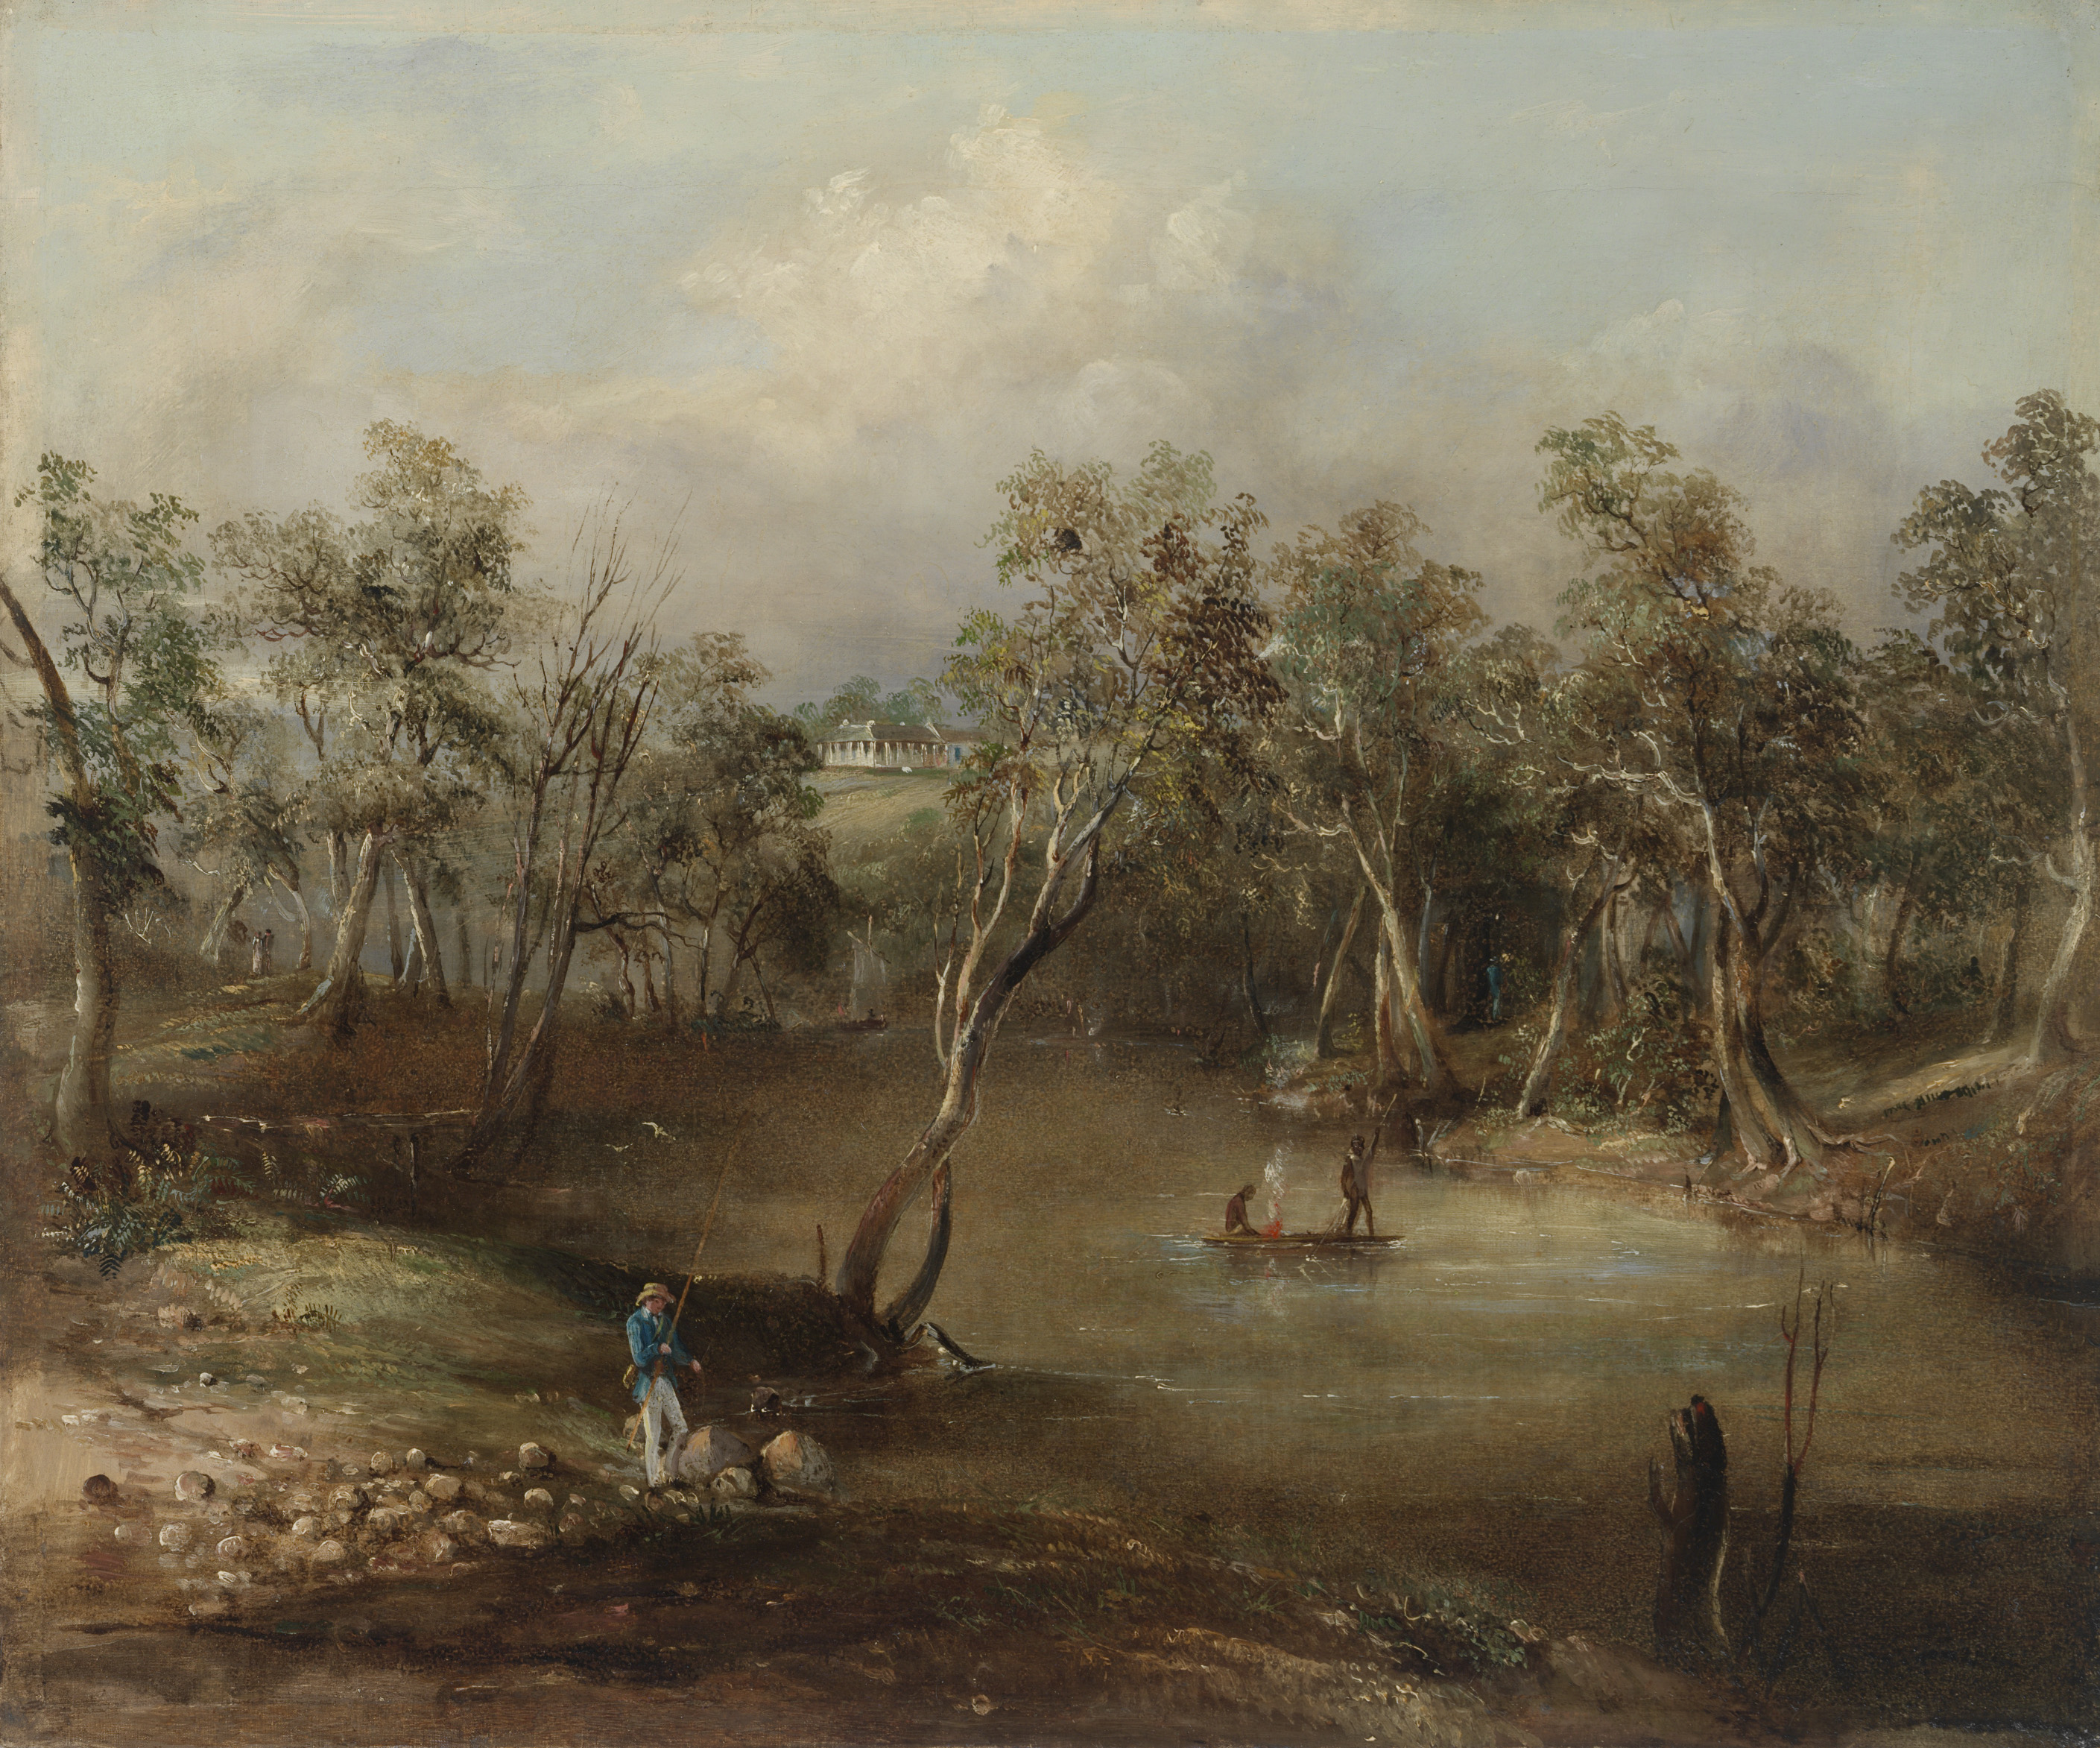 painting - Residence of G[eorge] A[ugustus] Robinson on Yarra, c.1840 / [attributed to G.A. Gilbert]